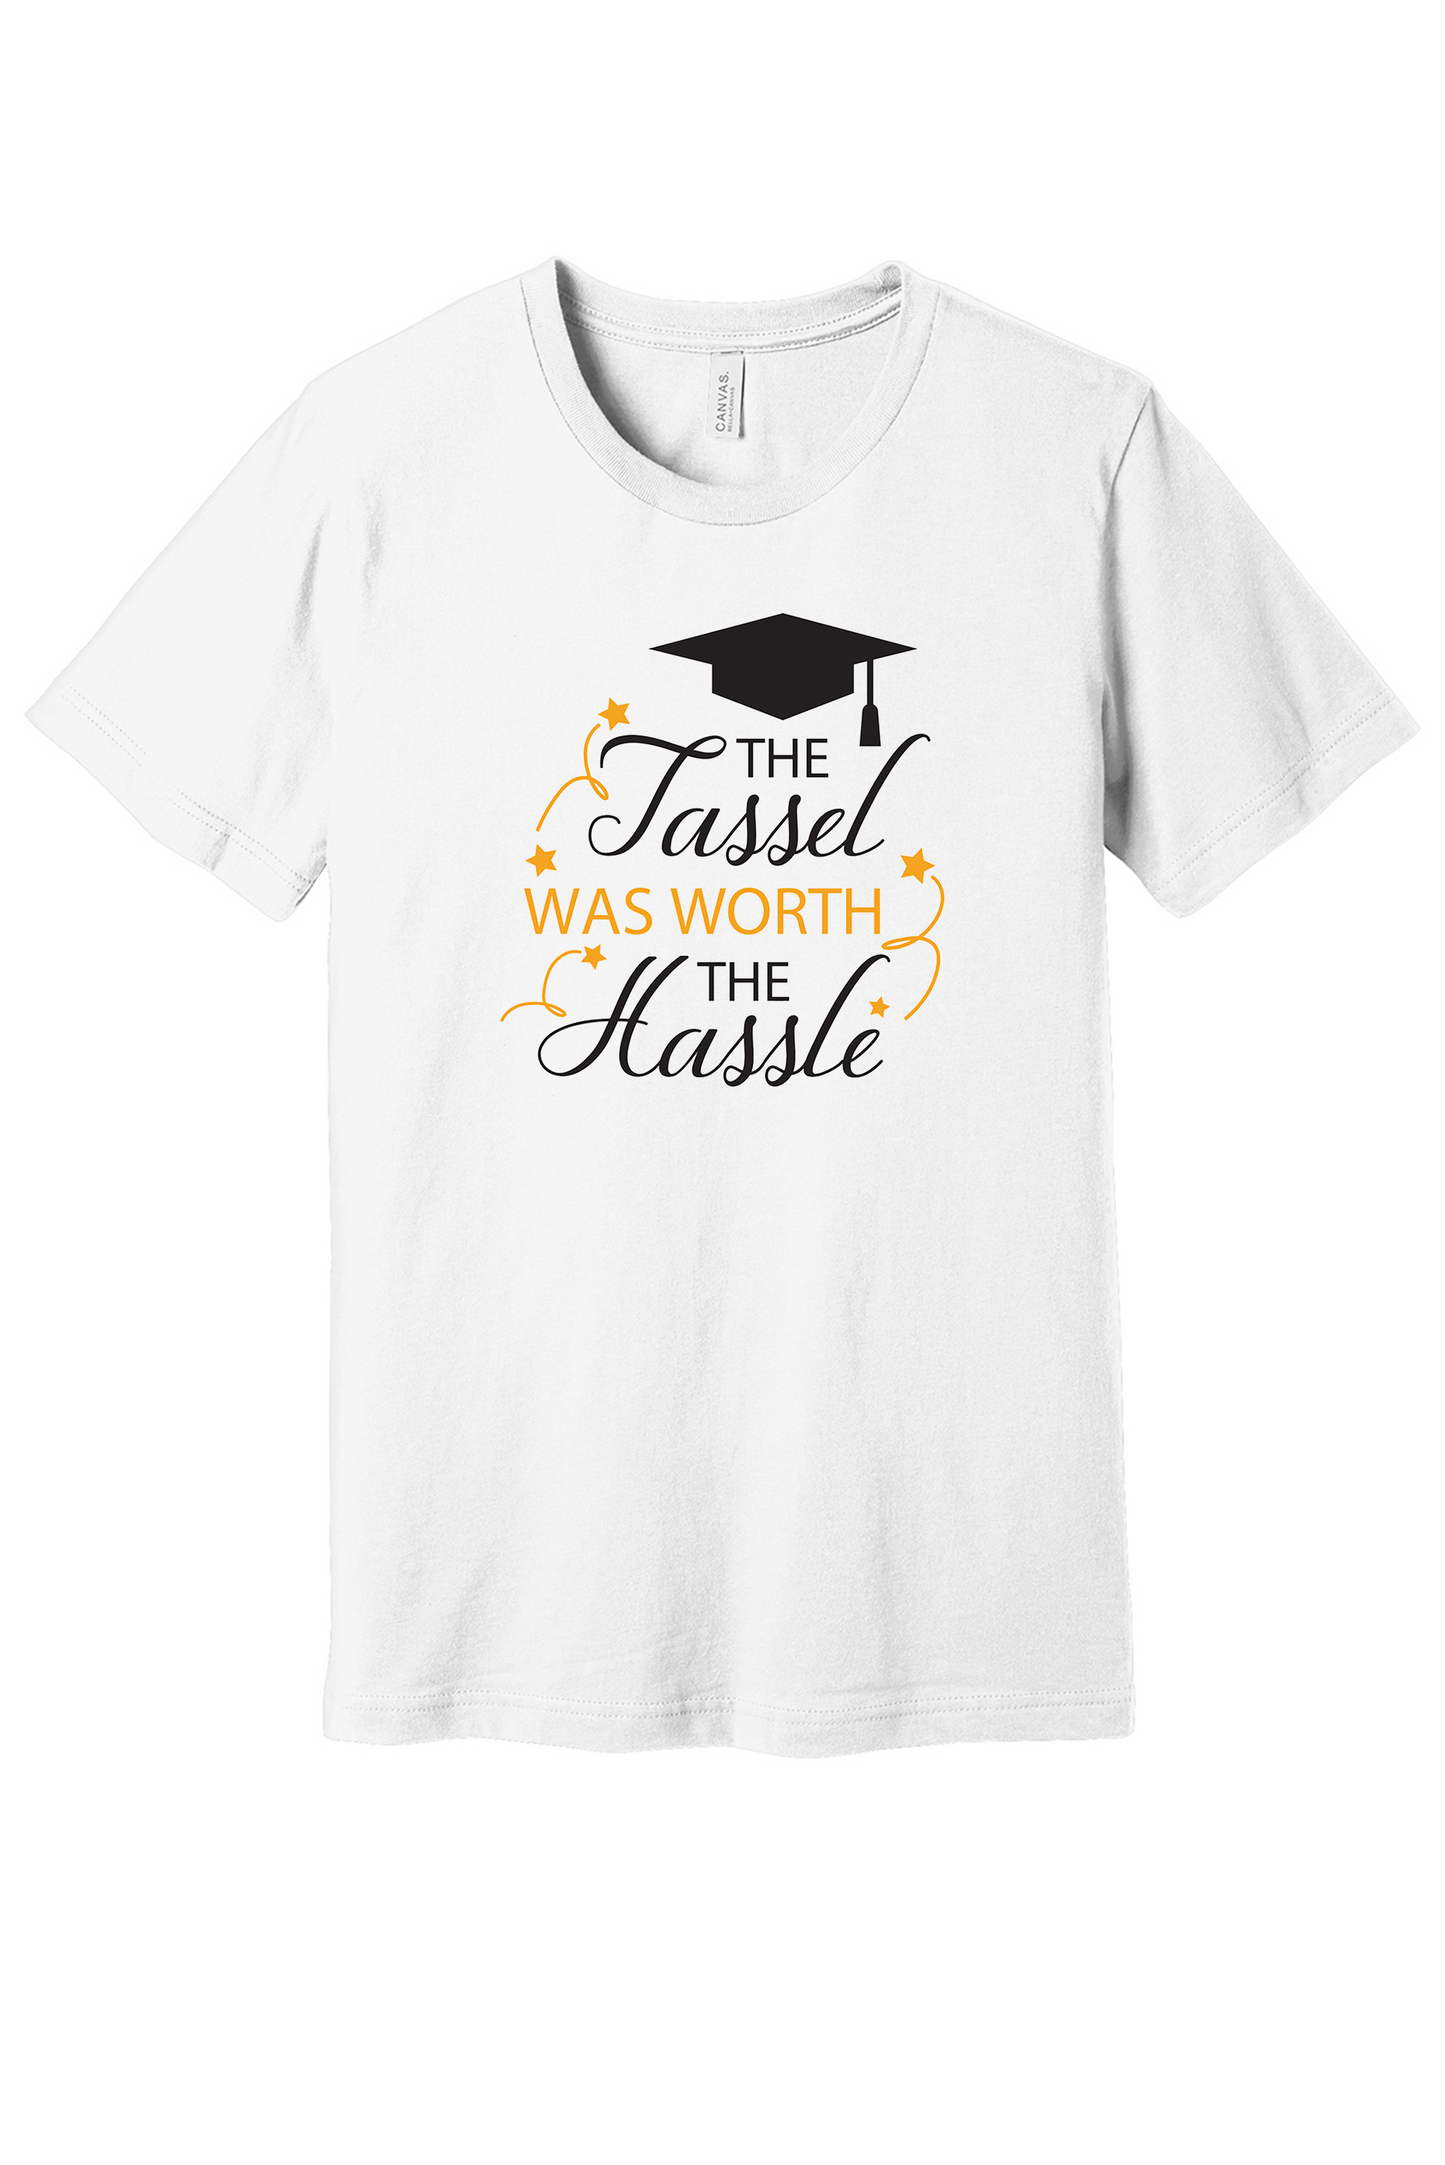 Graduation Day College High School Graphic Tees